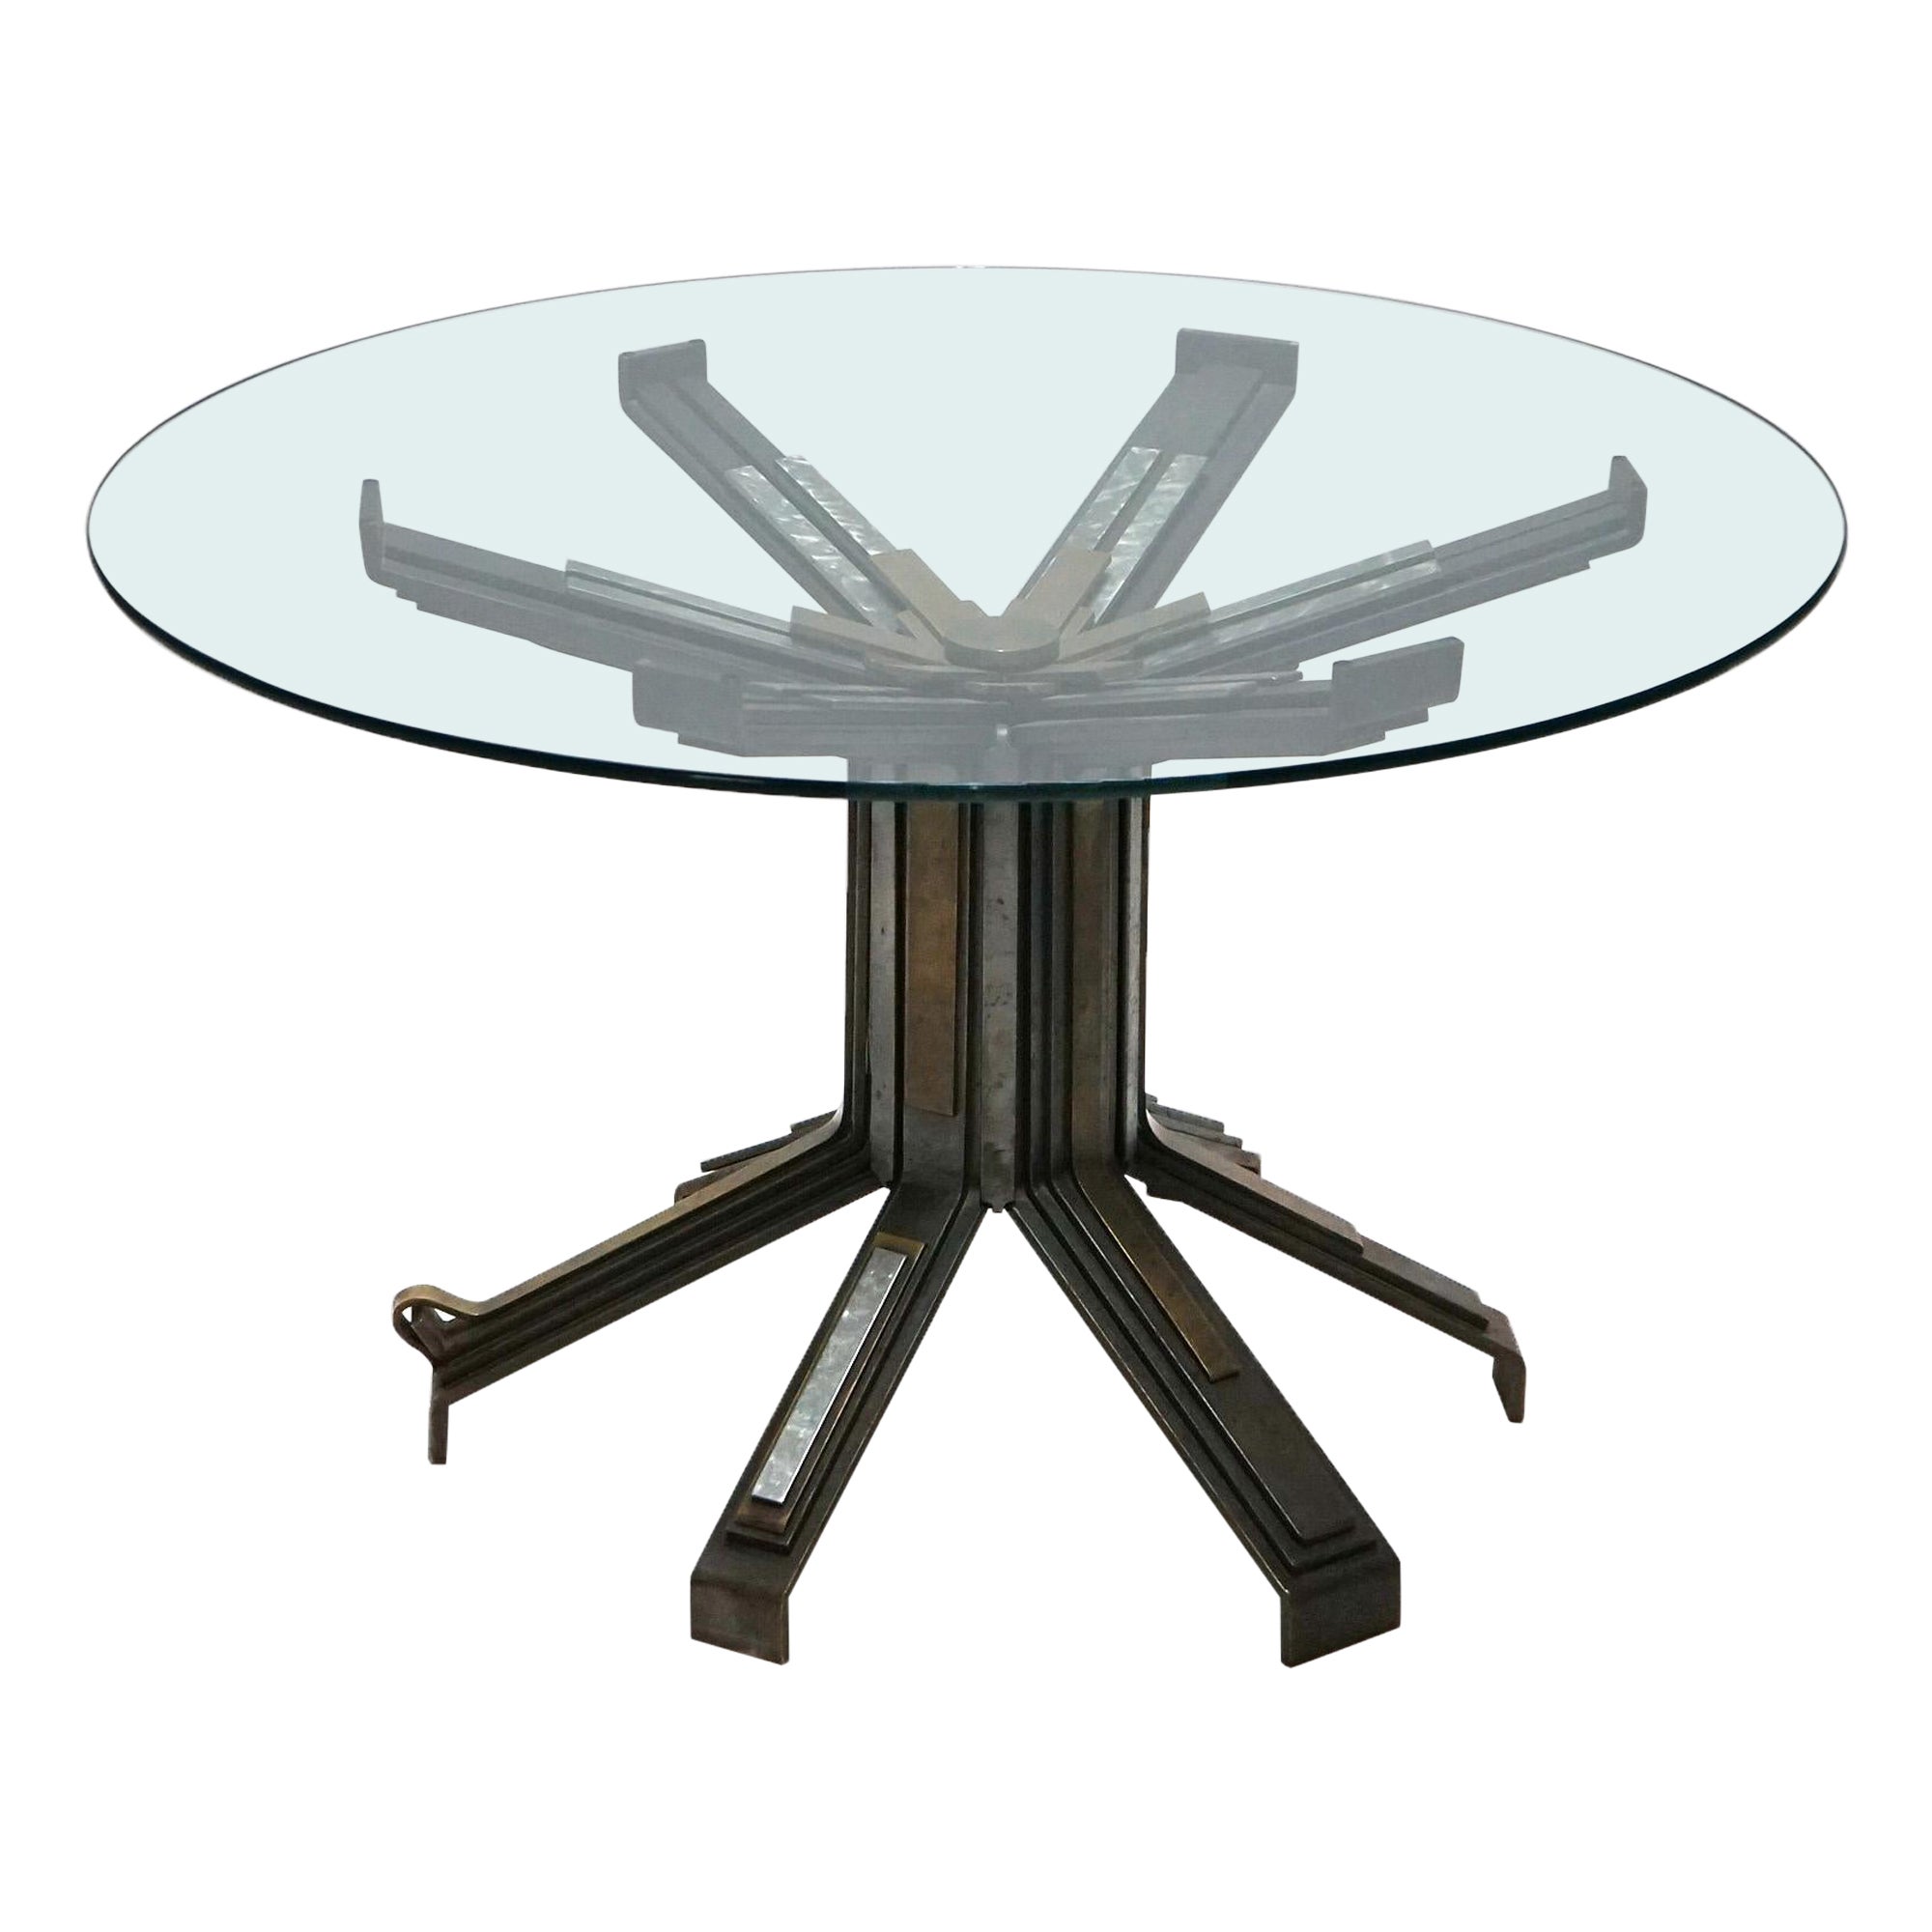 MCM Monty W. Stephens Brutalist Style Brushed Steel, Bronze & Brass Dining Table